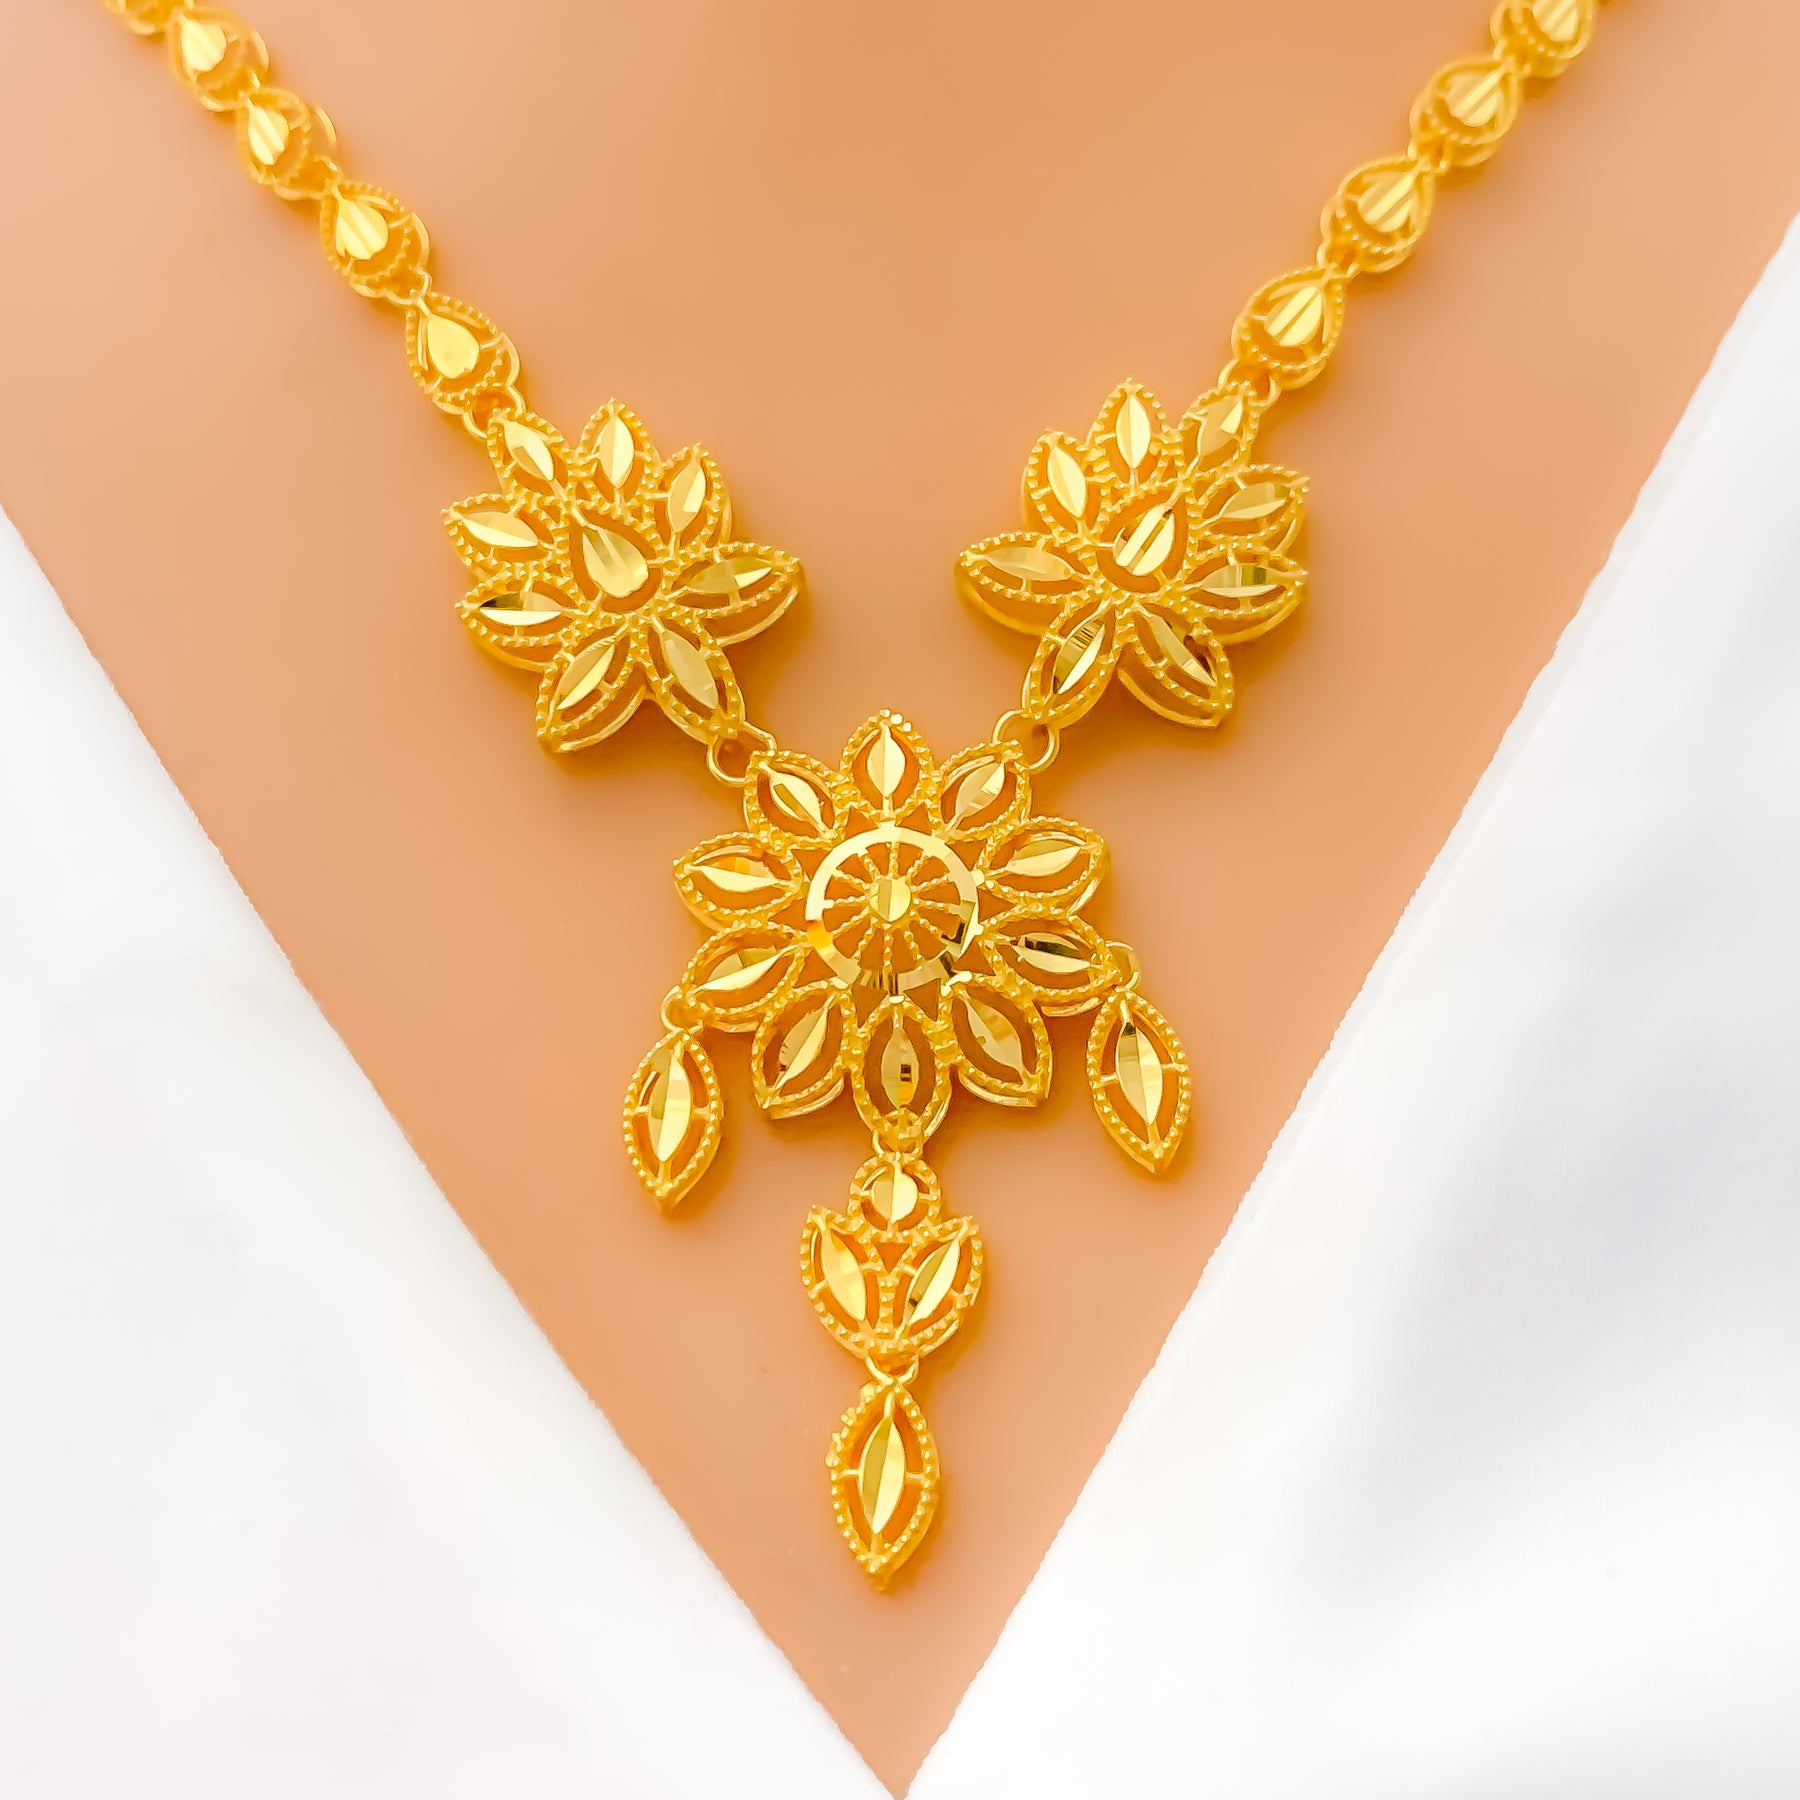 Gold Flower Pendant Three in One Chain Necklace | Uncommon James